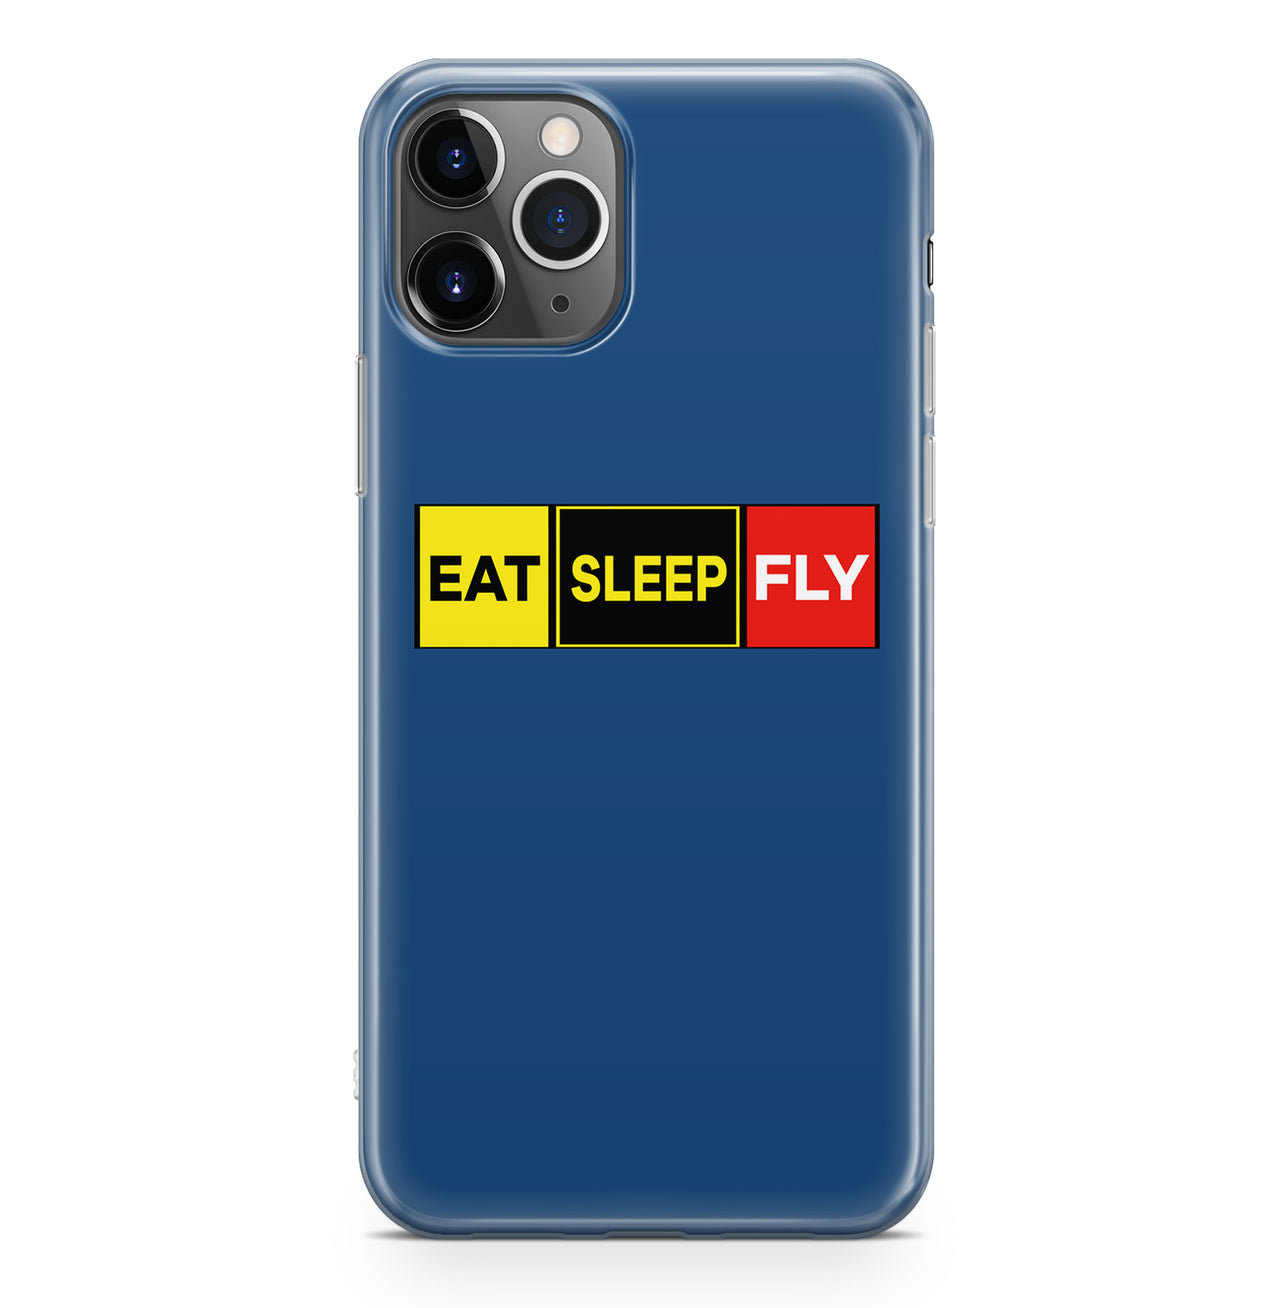 Eat Sleep Fly (Colourful) Designed iPhone Cases